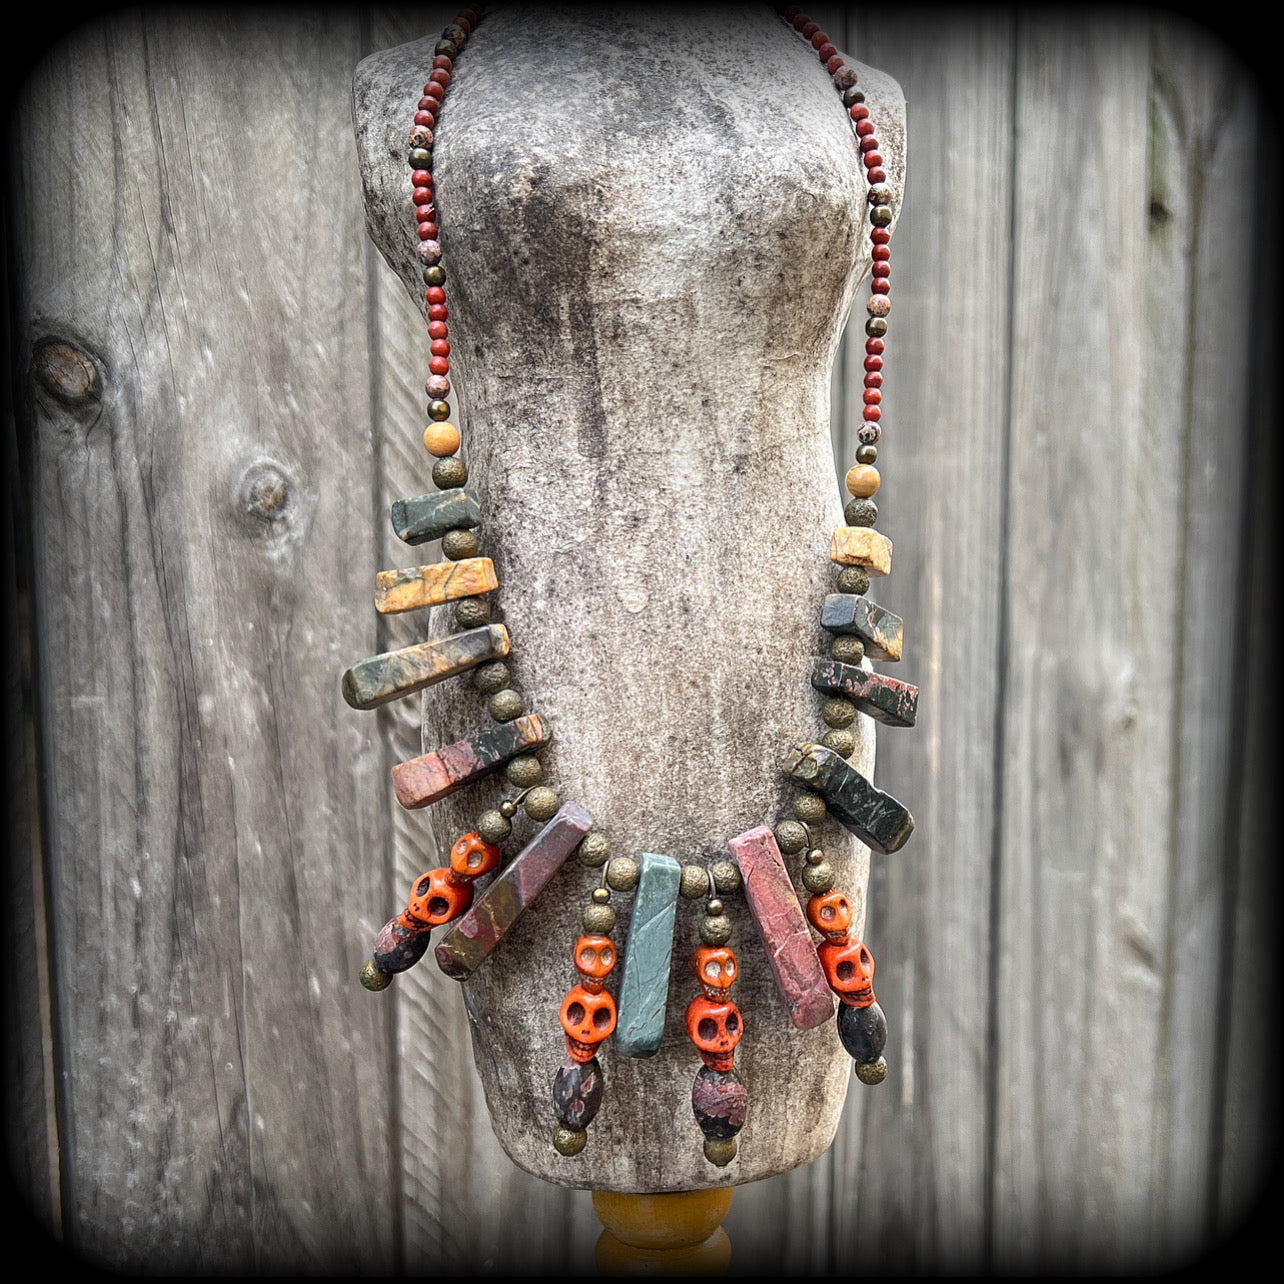 One of a kind Papa Legba skull necklace-Picasso jasper necklace